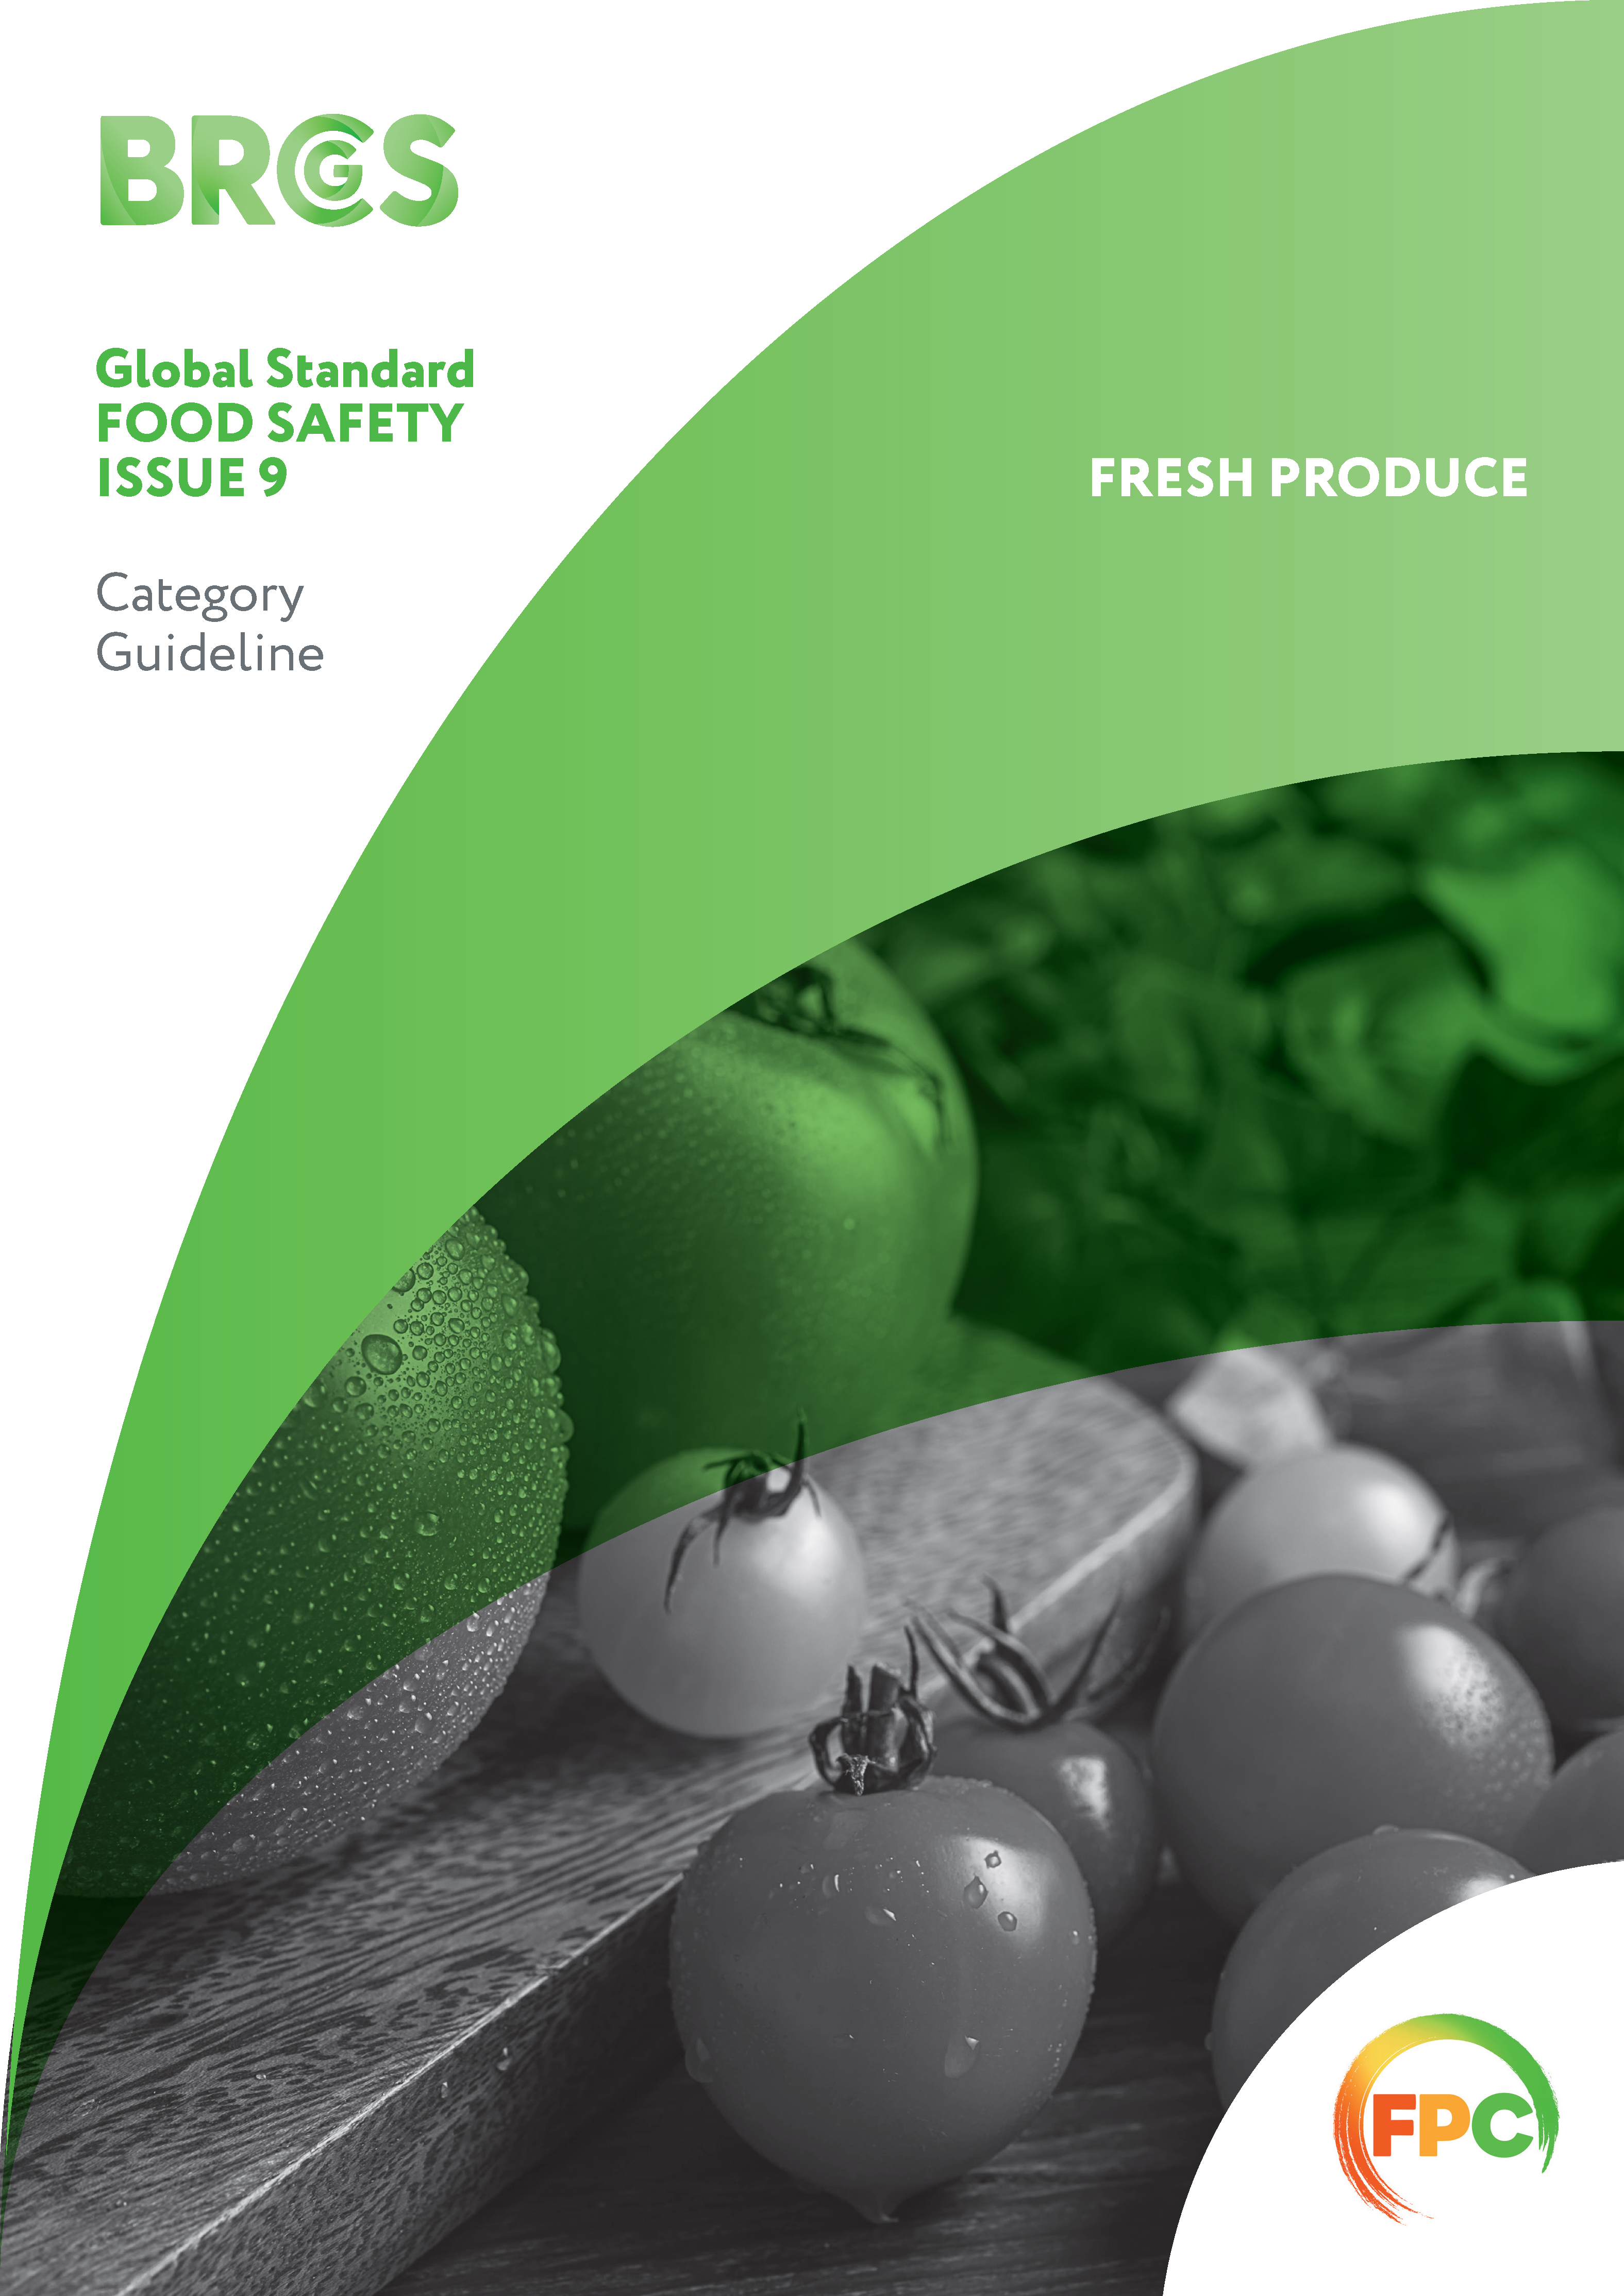 Guideline for category 5 Fresh Produce